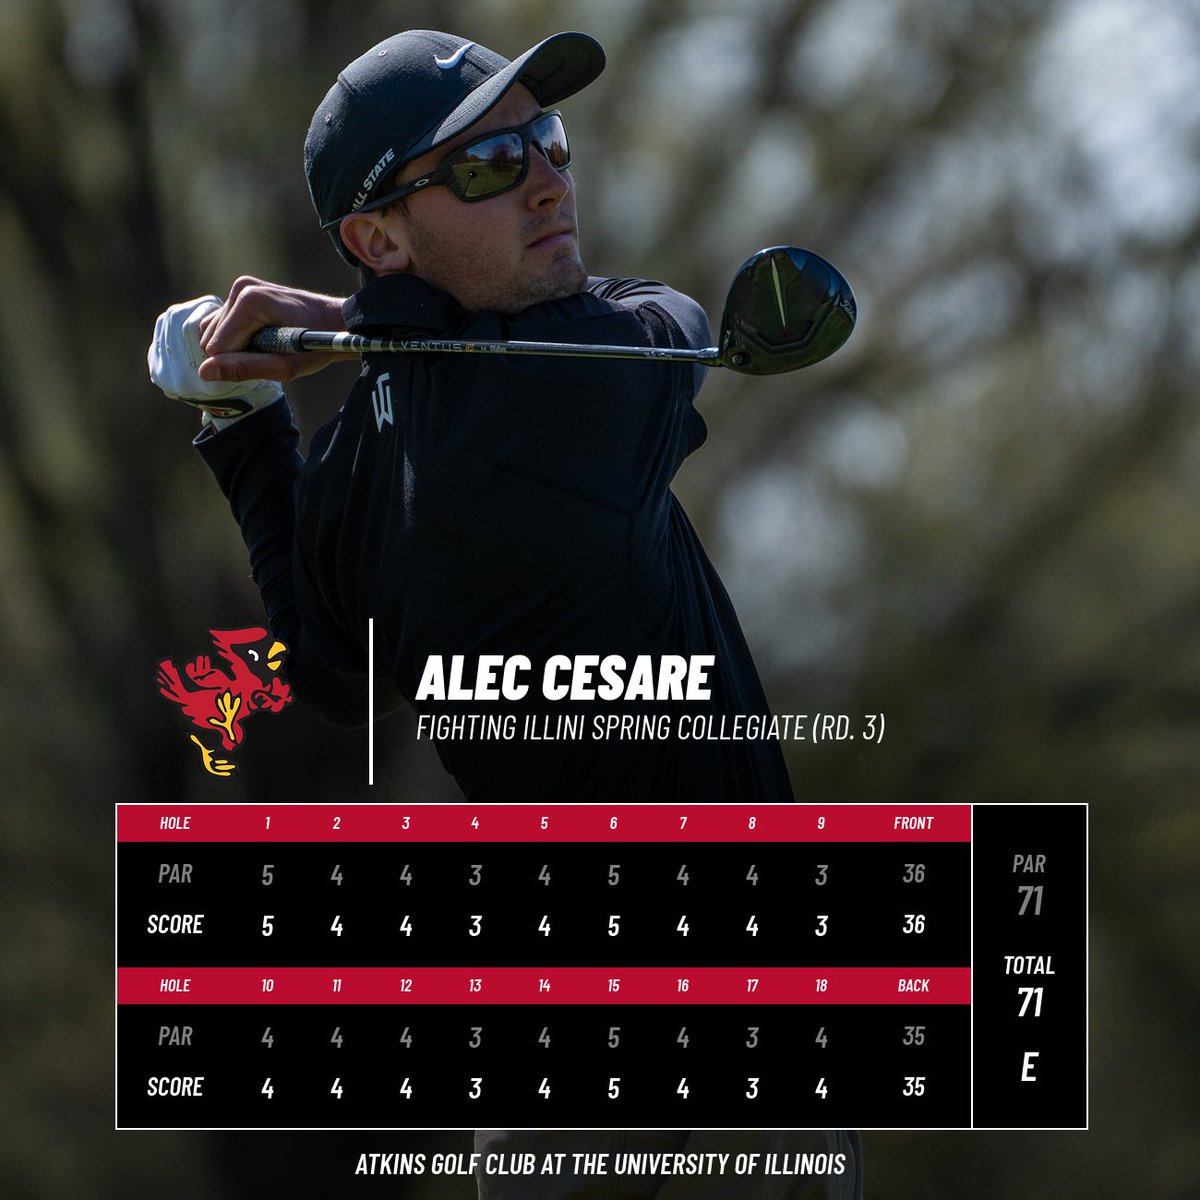 18 straight holes of par! Alec Cesare paces Cardinals in the final round Sunday as Ball State finishes fifth at the Fighting Illini Spring Collegiate. Final results and story to come ... 📊: bit.ly/49J2Yjl #ChirpChirp x #WeFly